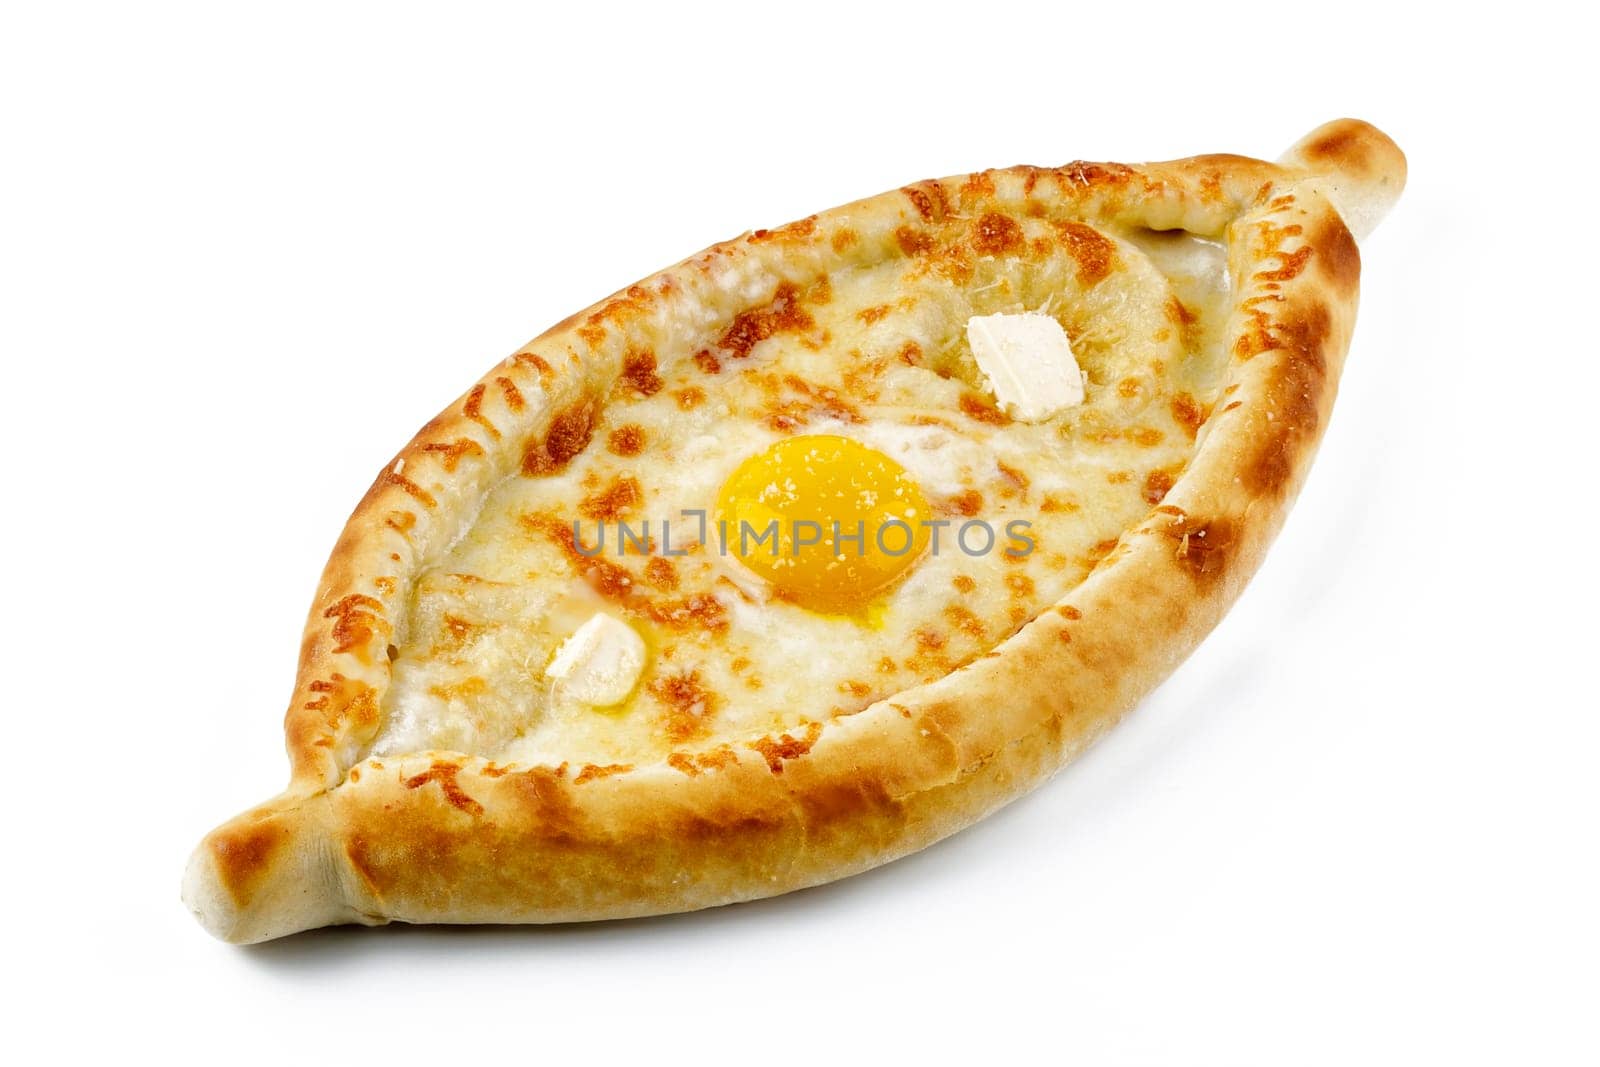 traditional Georgian dish of cheese-filled bread - khachapuri in adjarian style with egg and butter isolated on white background by Mixa74